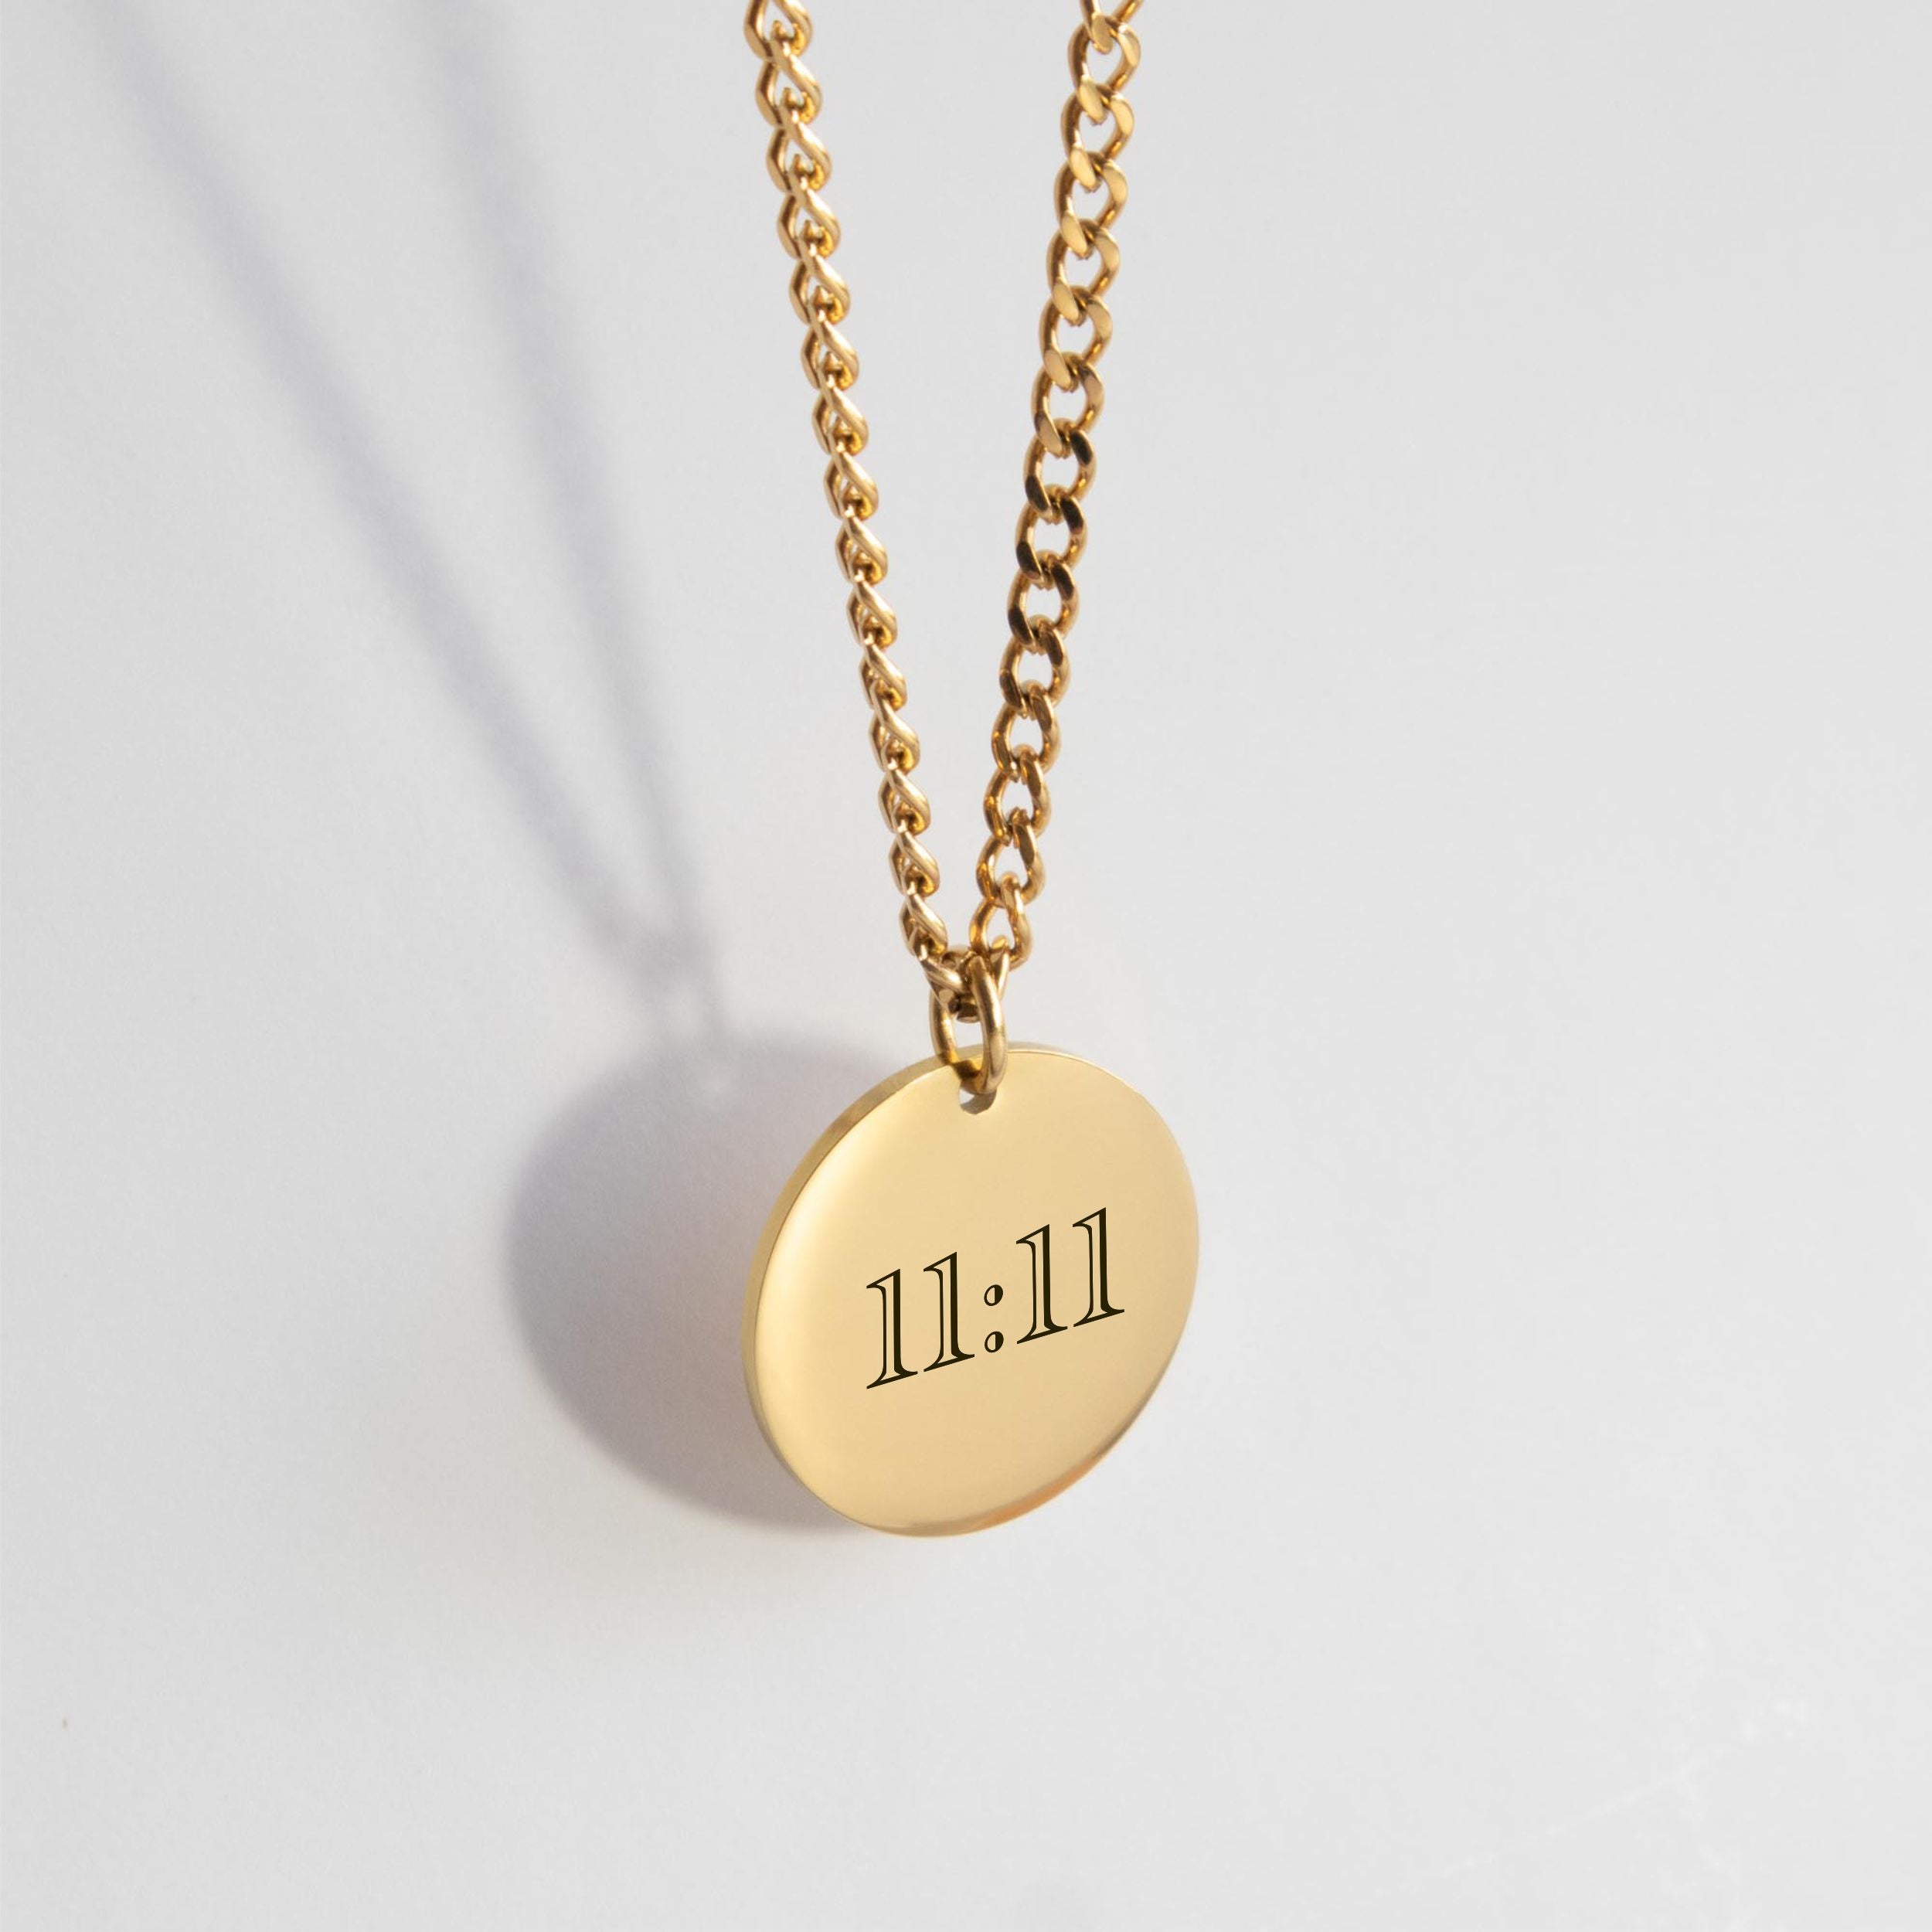 11:11 Necklace | Engraved necklace, Number necklace, Gold collar necklace